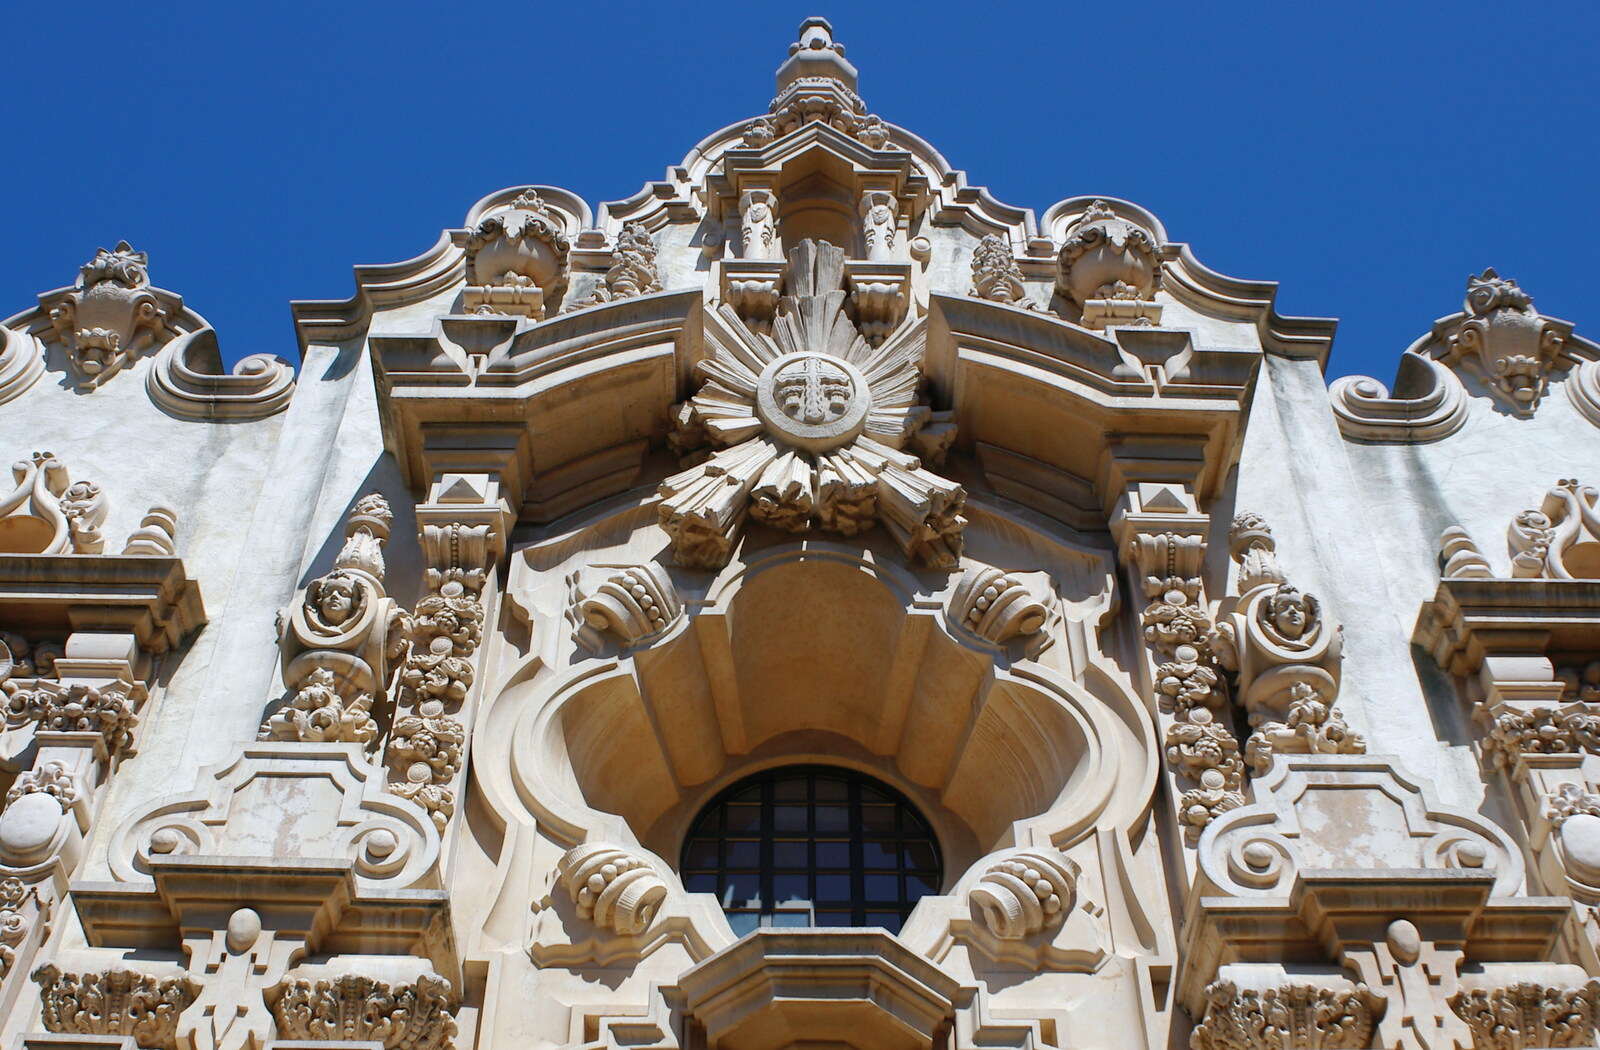 Scenes and People of Balboa Park, San Diego, California - 25th September 2005: Architectural detail